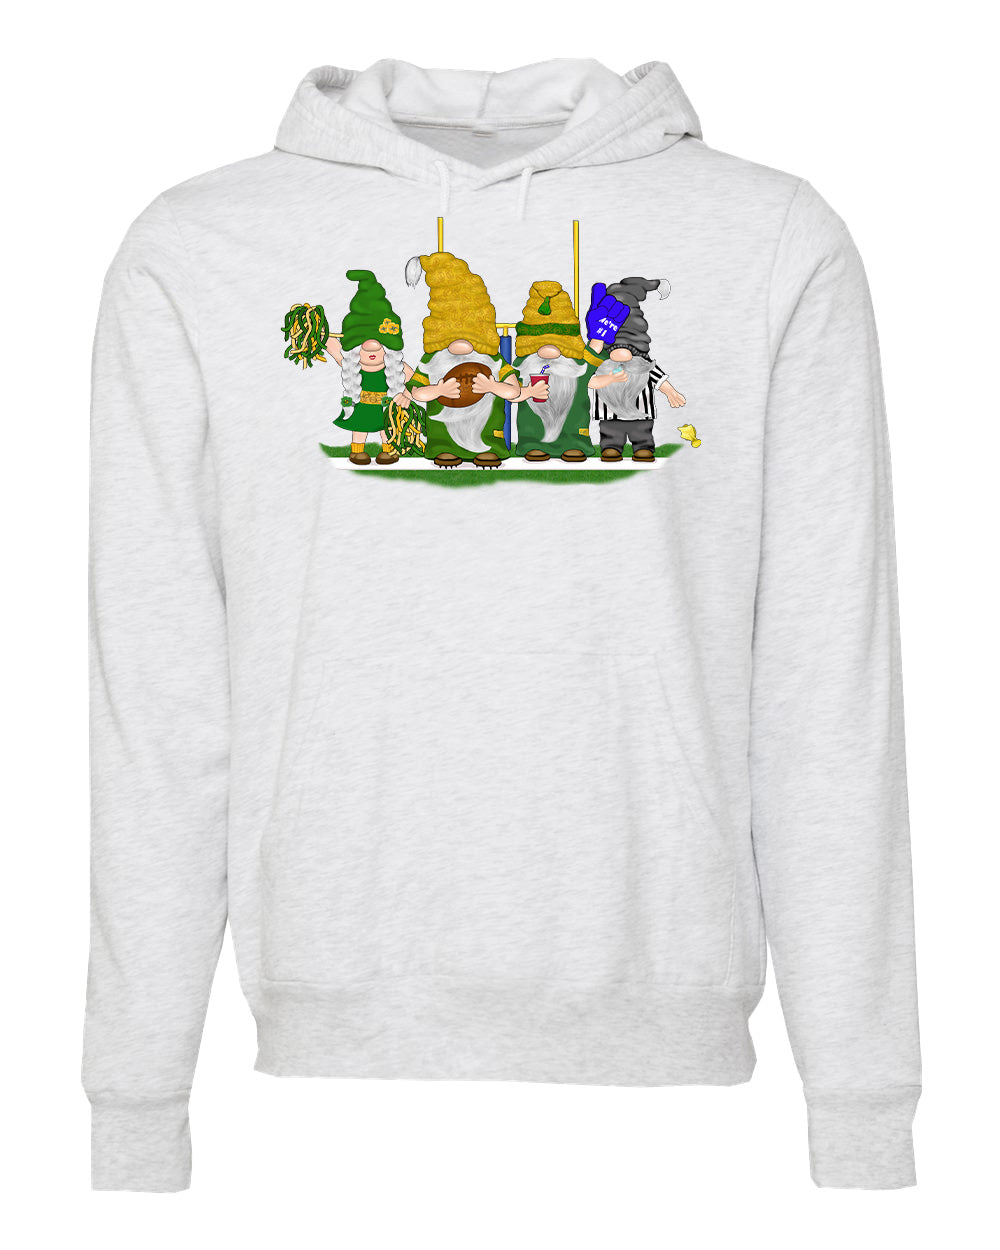 Green & Gold Football Gnomes  (similar to Green Bay) on Unisex Hoodie